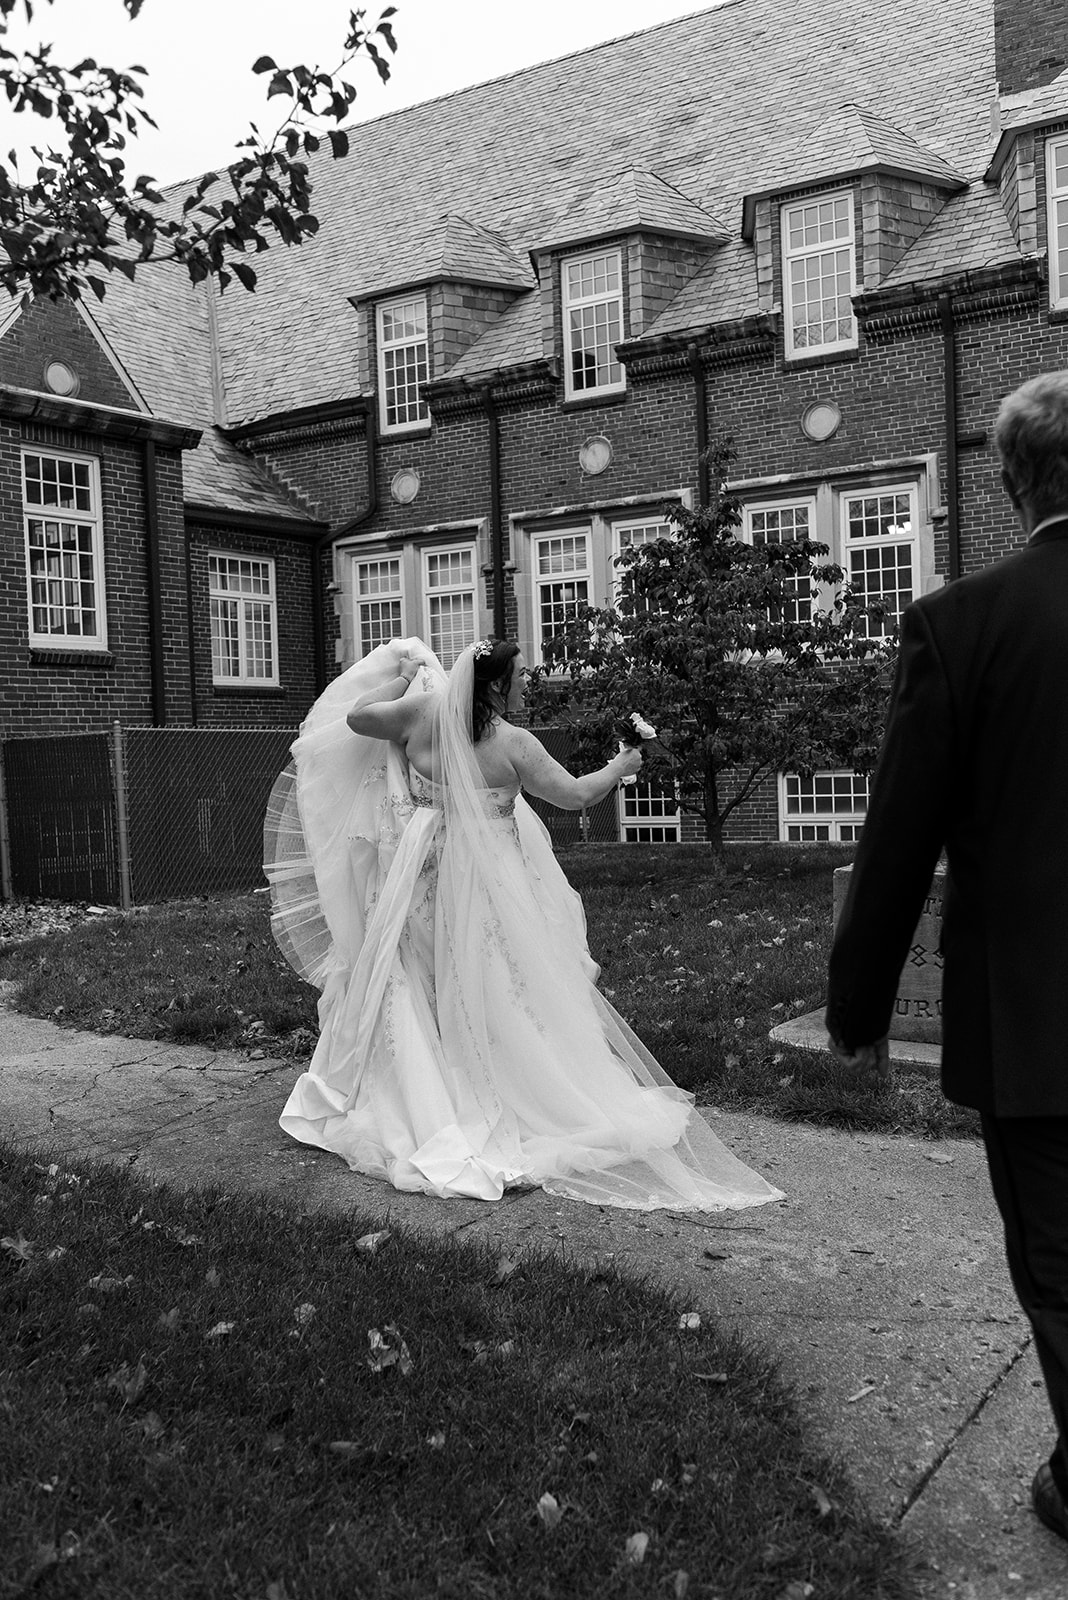 black and white detail image of wedding dress in motion